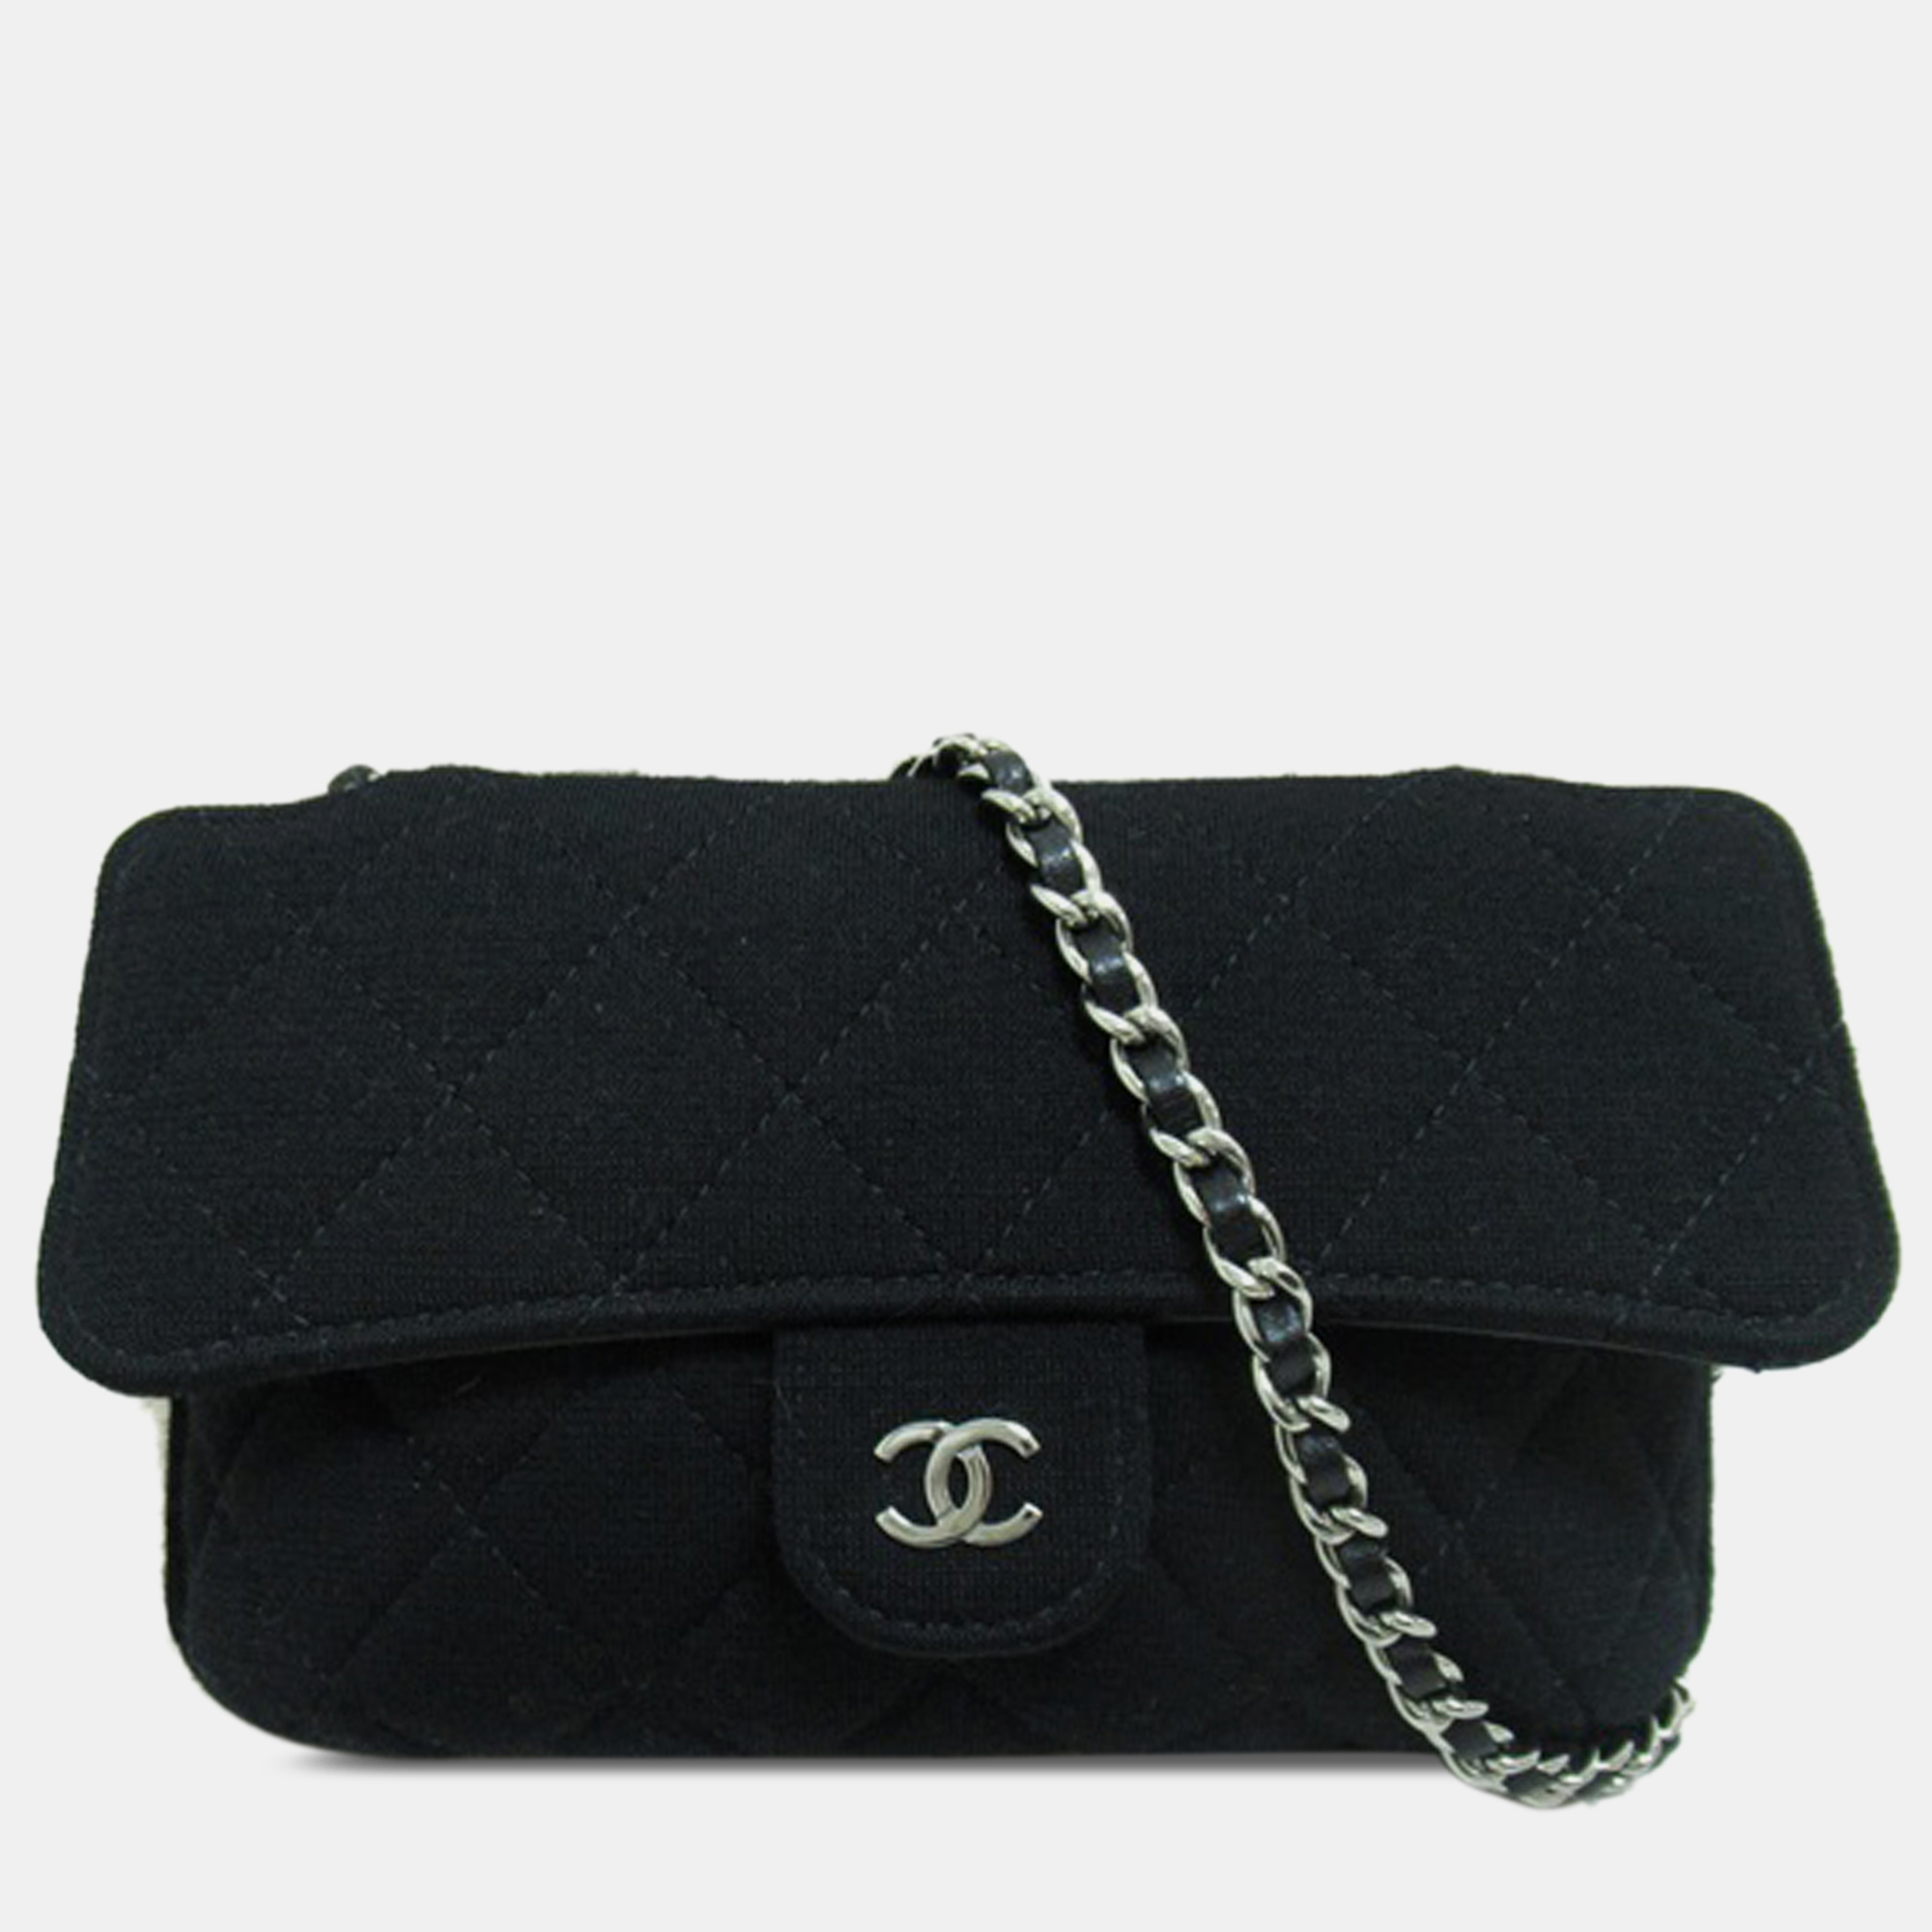 Chanel canvas graffiti foldable shopping tote in jersey flap